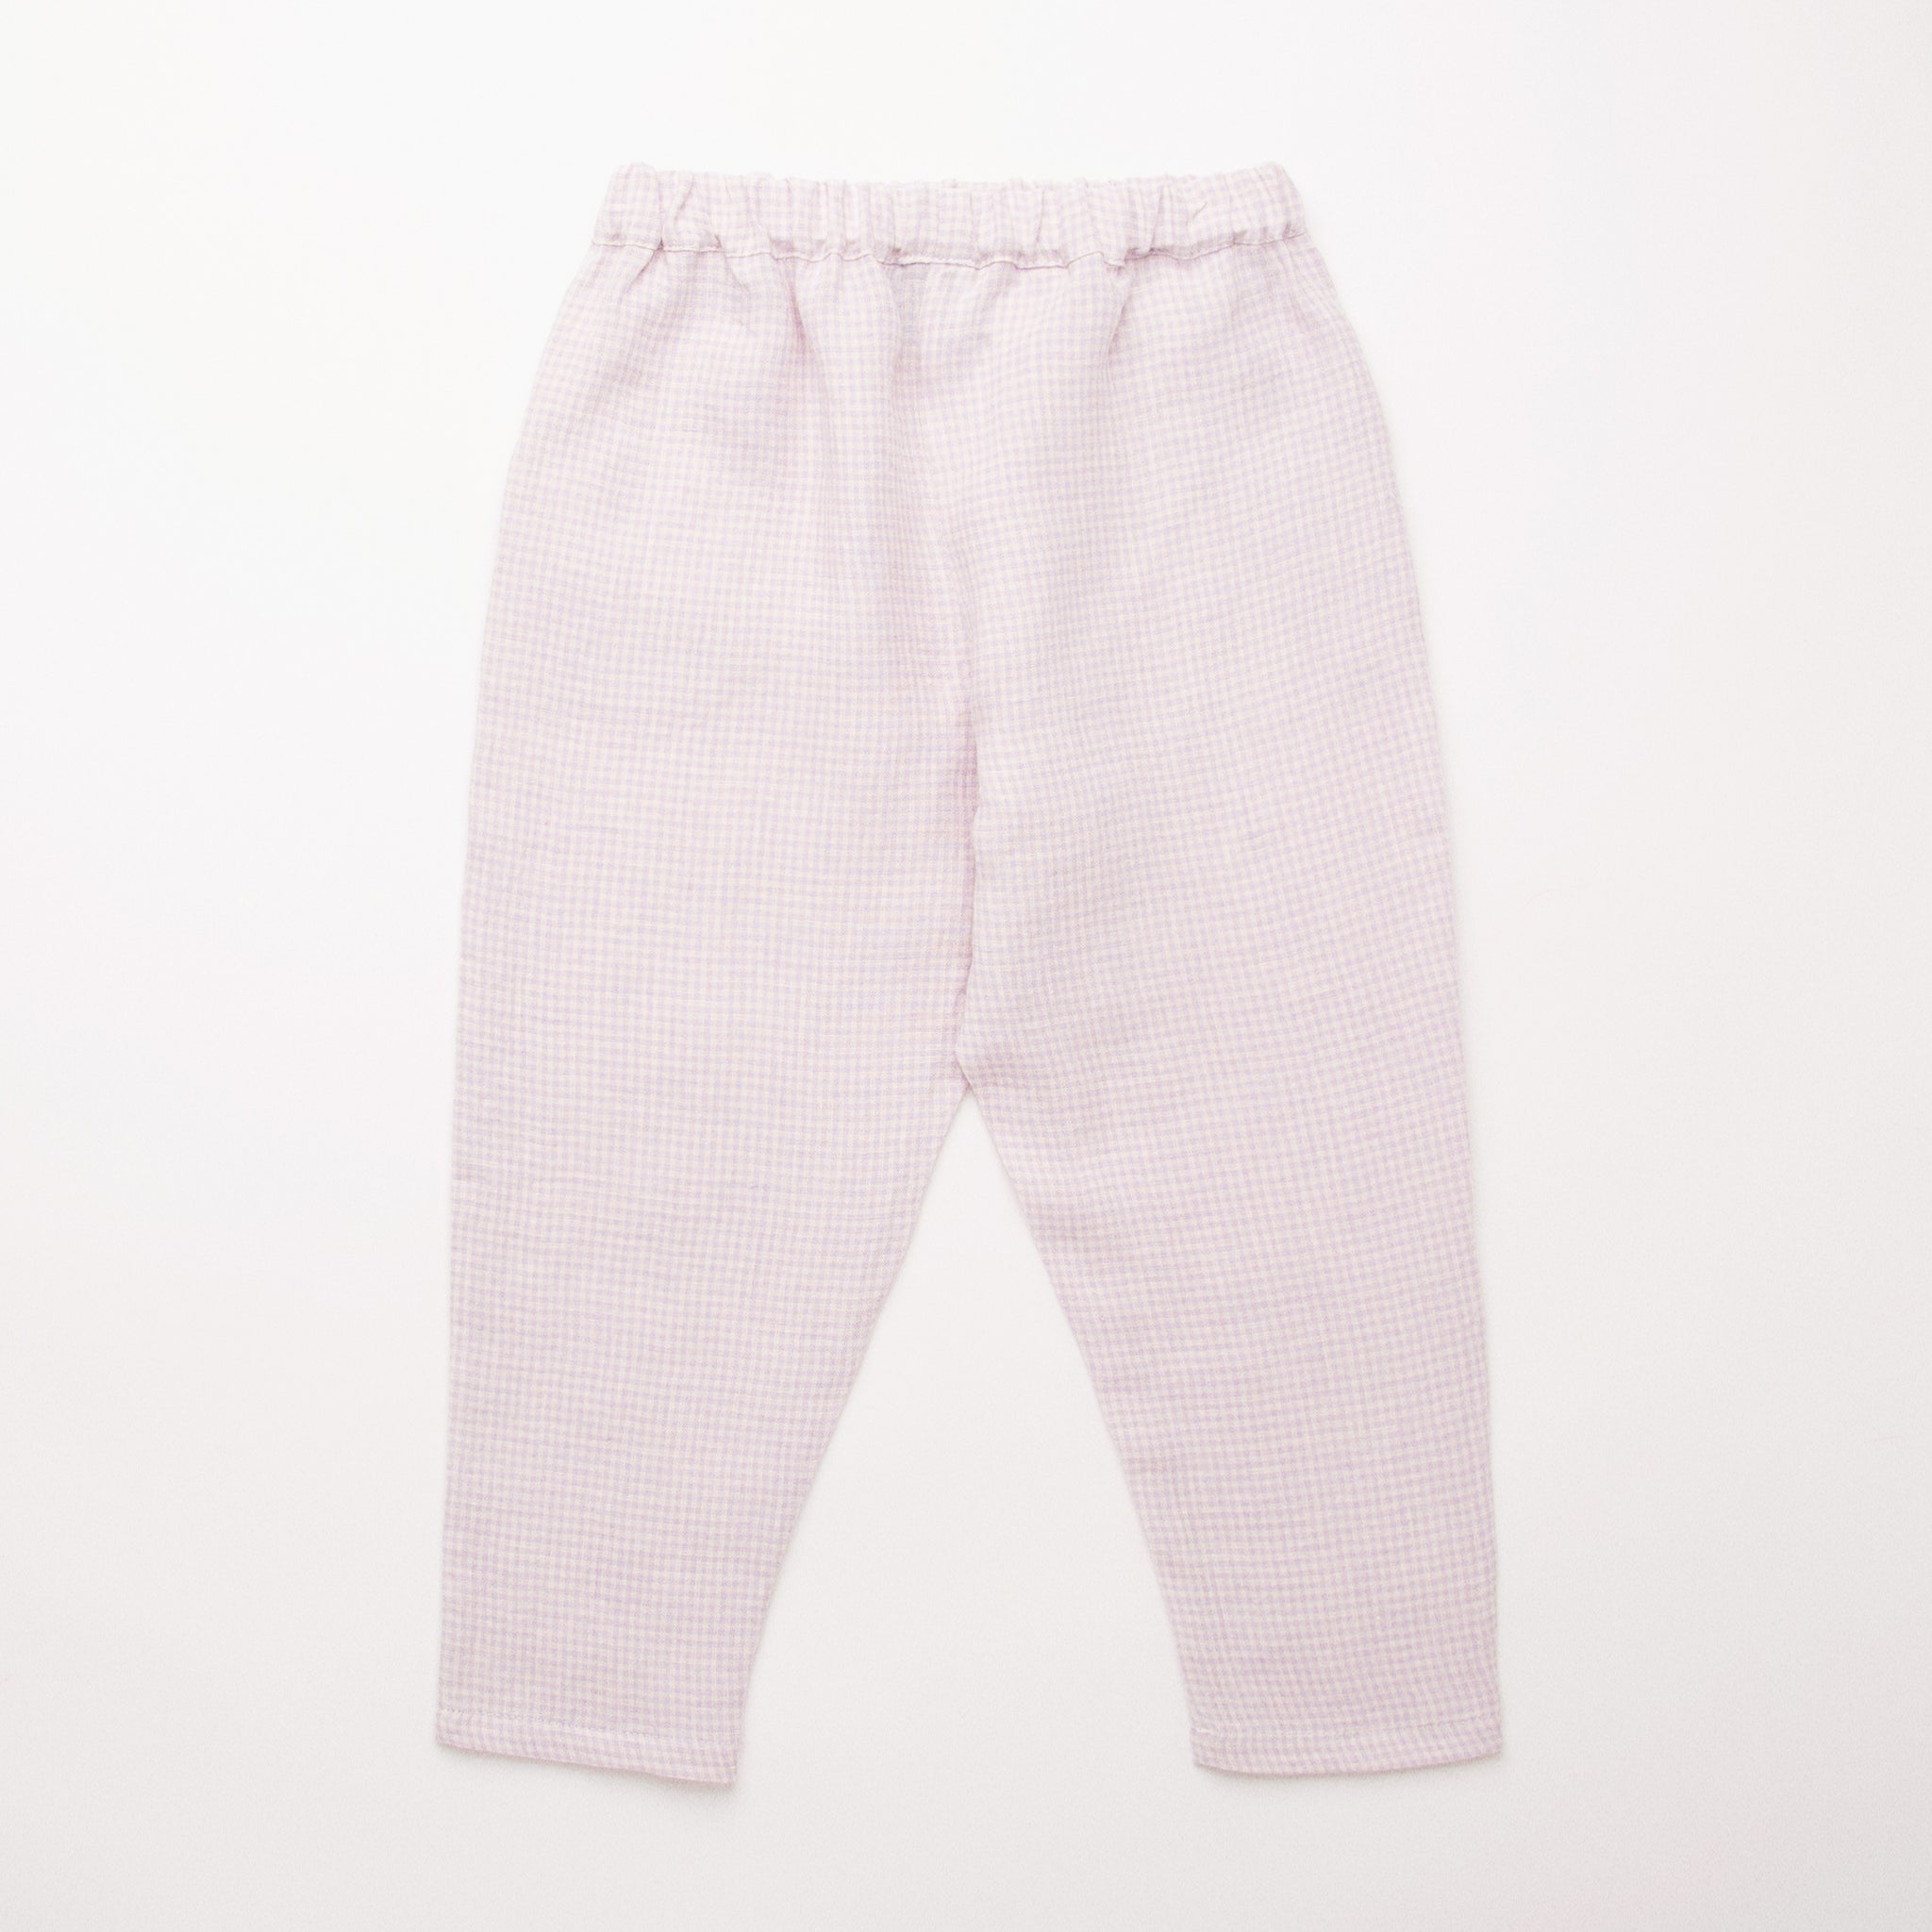 Nellie Quats Girls Jumping Jack Trousers In Lavender Check Linen.